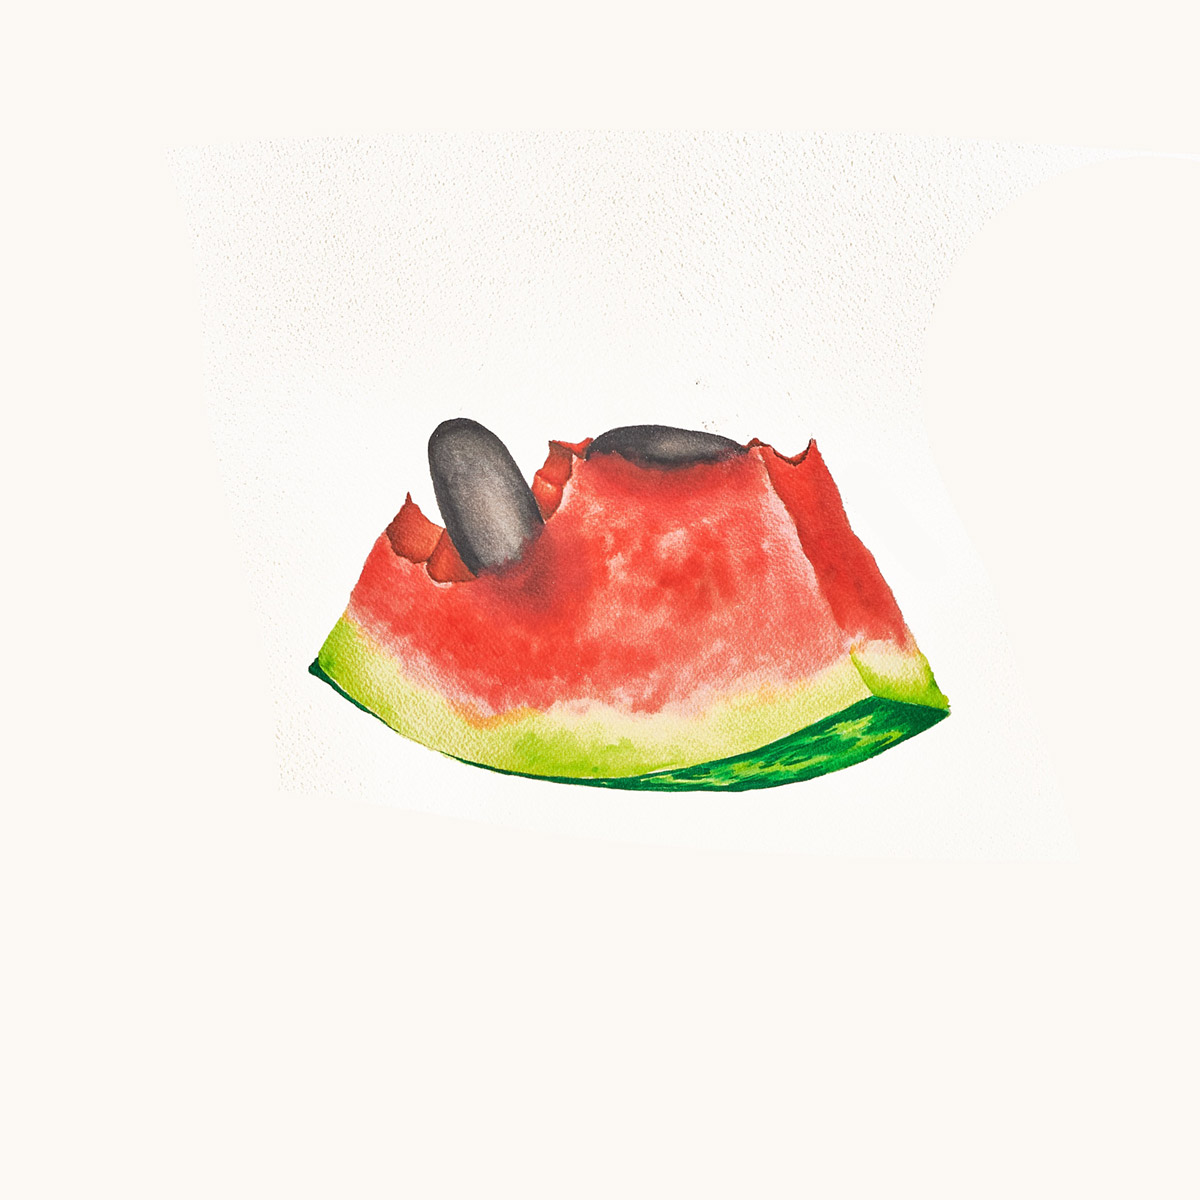 A drawing of a piece of watermelon, half eaten with black seeds at the top